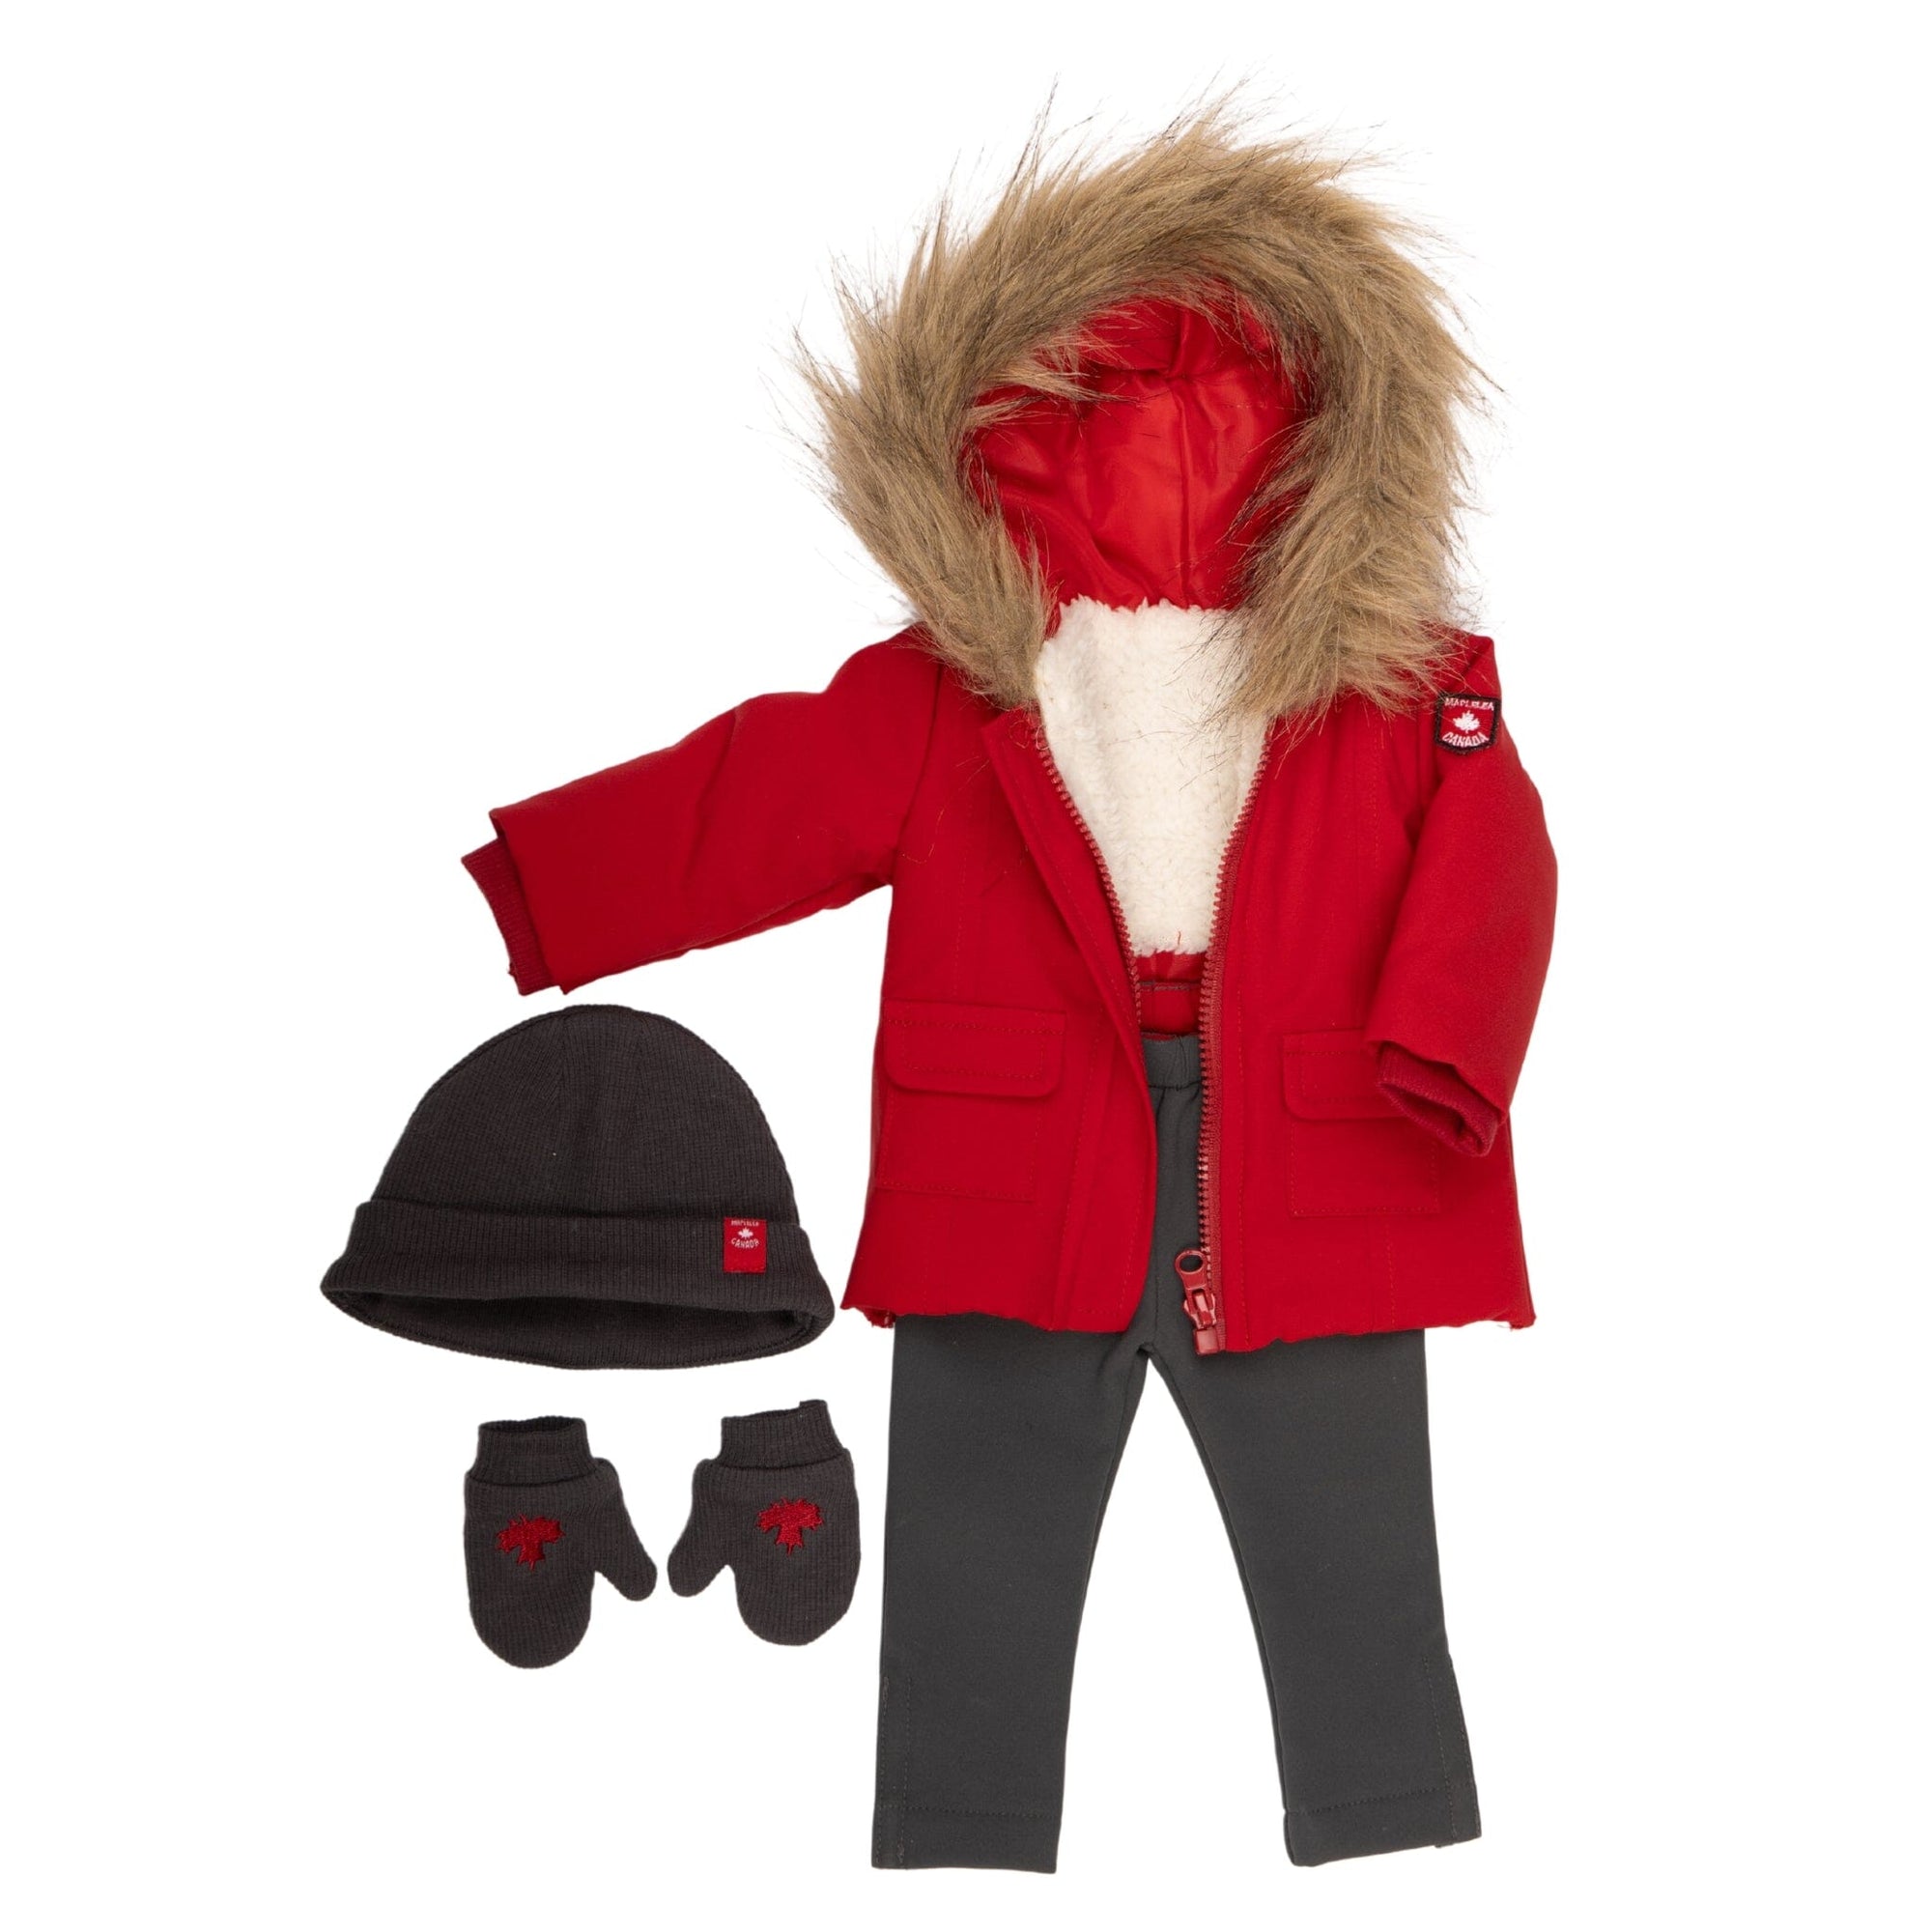 Far North Parka Outfit for 18-Inch Dolls